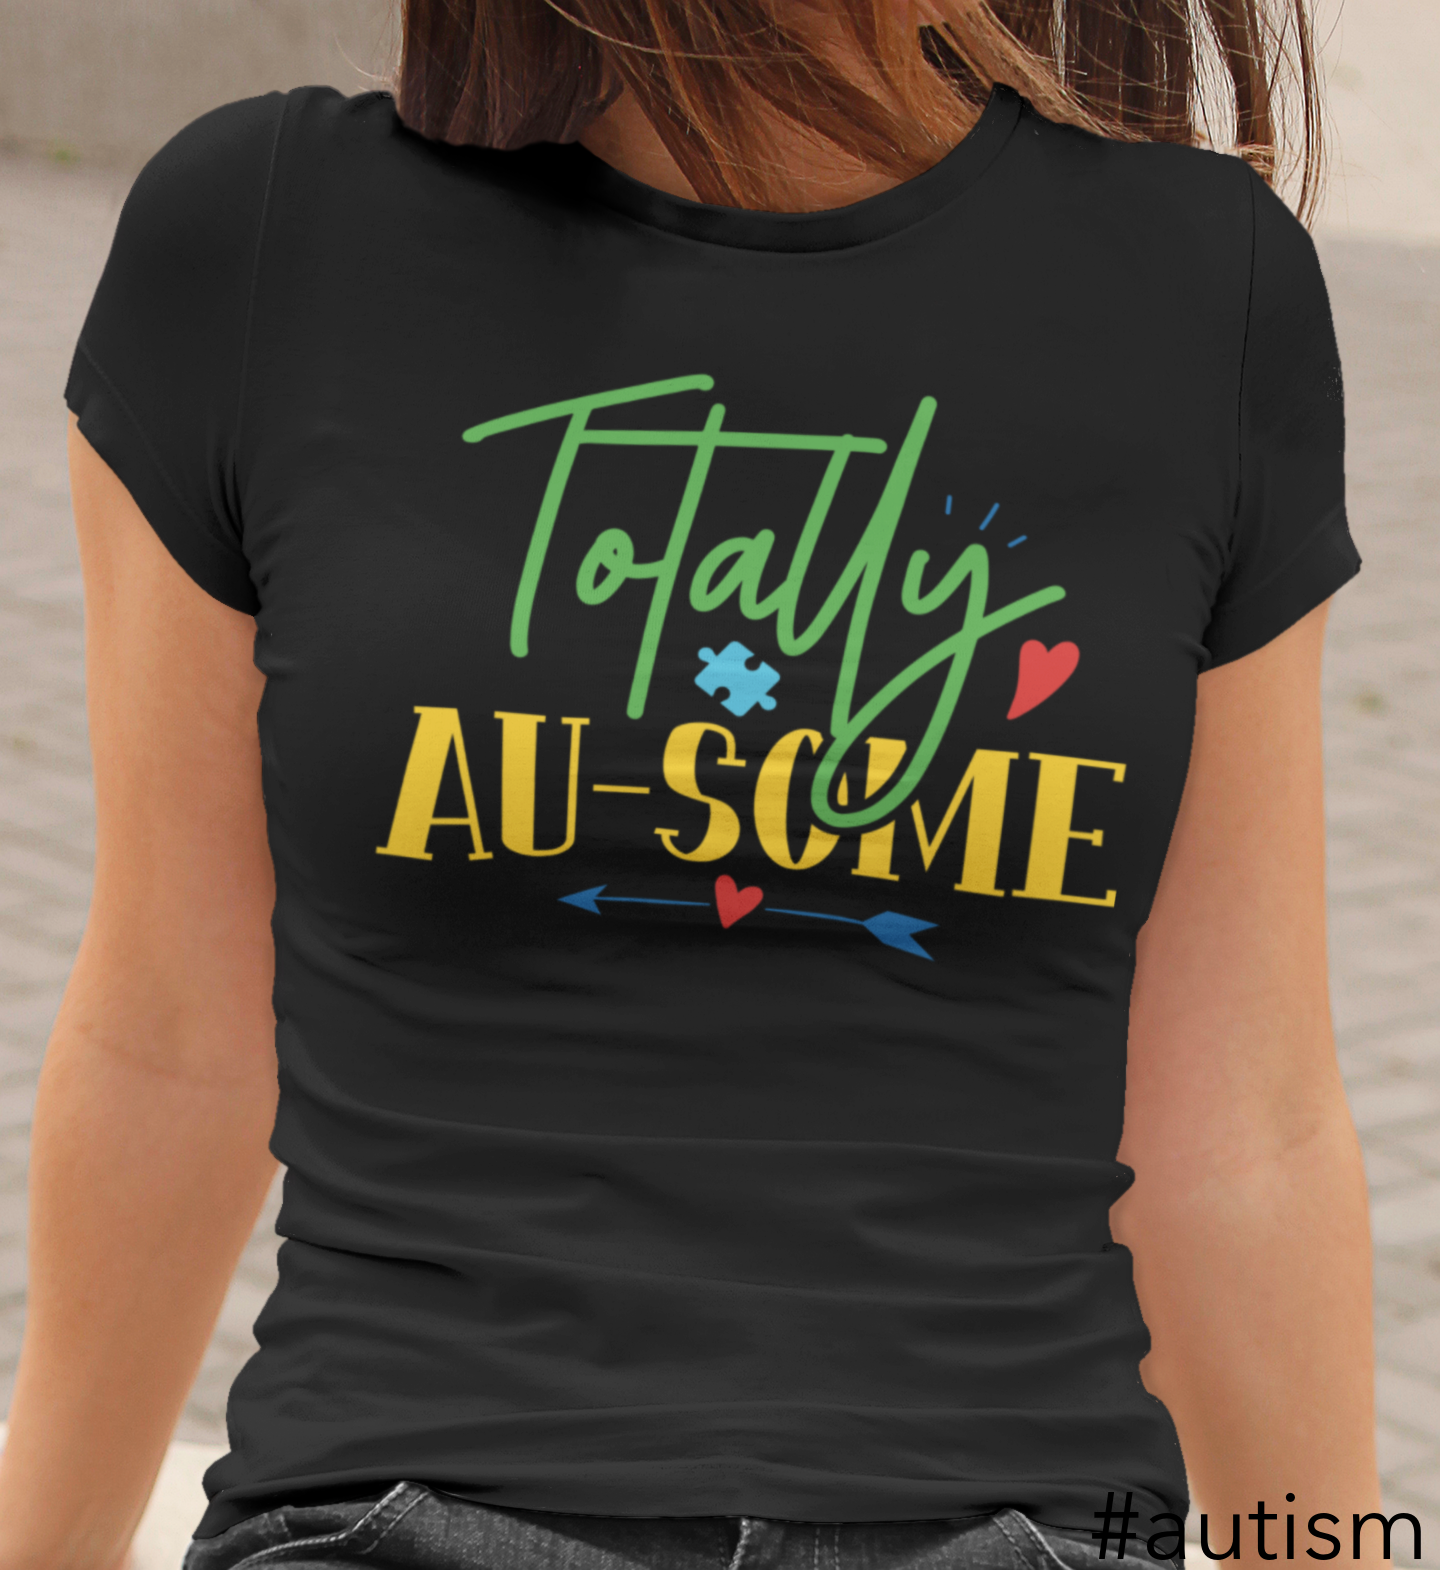 Totally Au-Some Autism Shirt, Adult Autism Awareness shirts, Autism Shirt Adult, Adult Autism Shirt, Autism Awareness Shirt Adult